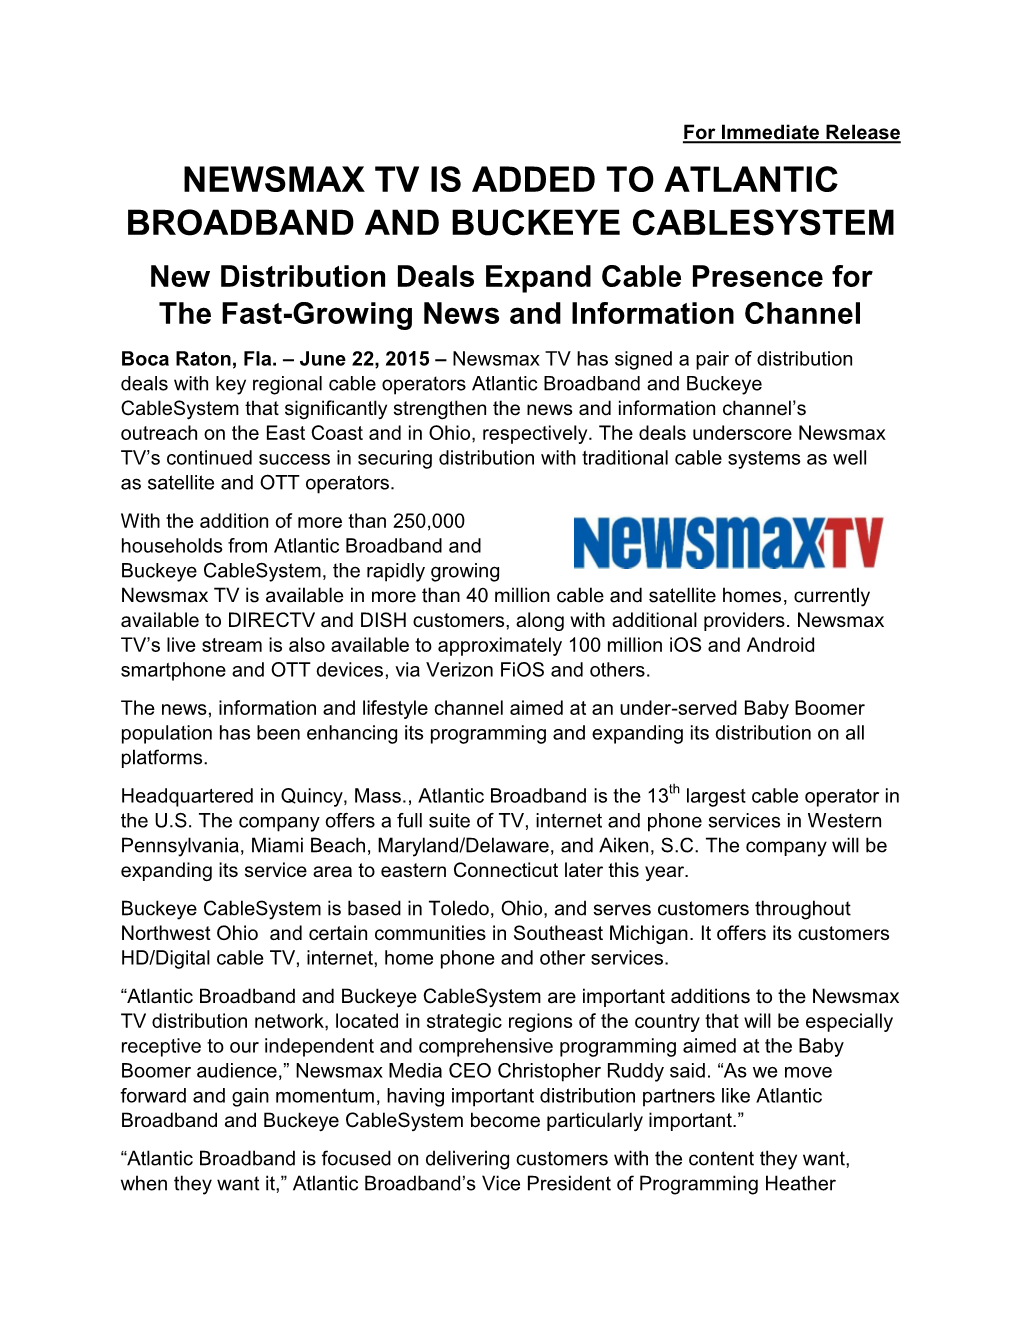 For Immediate Release NEWSMAX TV IS ADDED to ATLANTIC